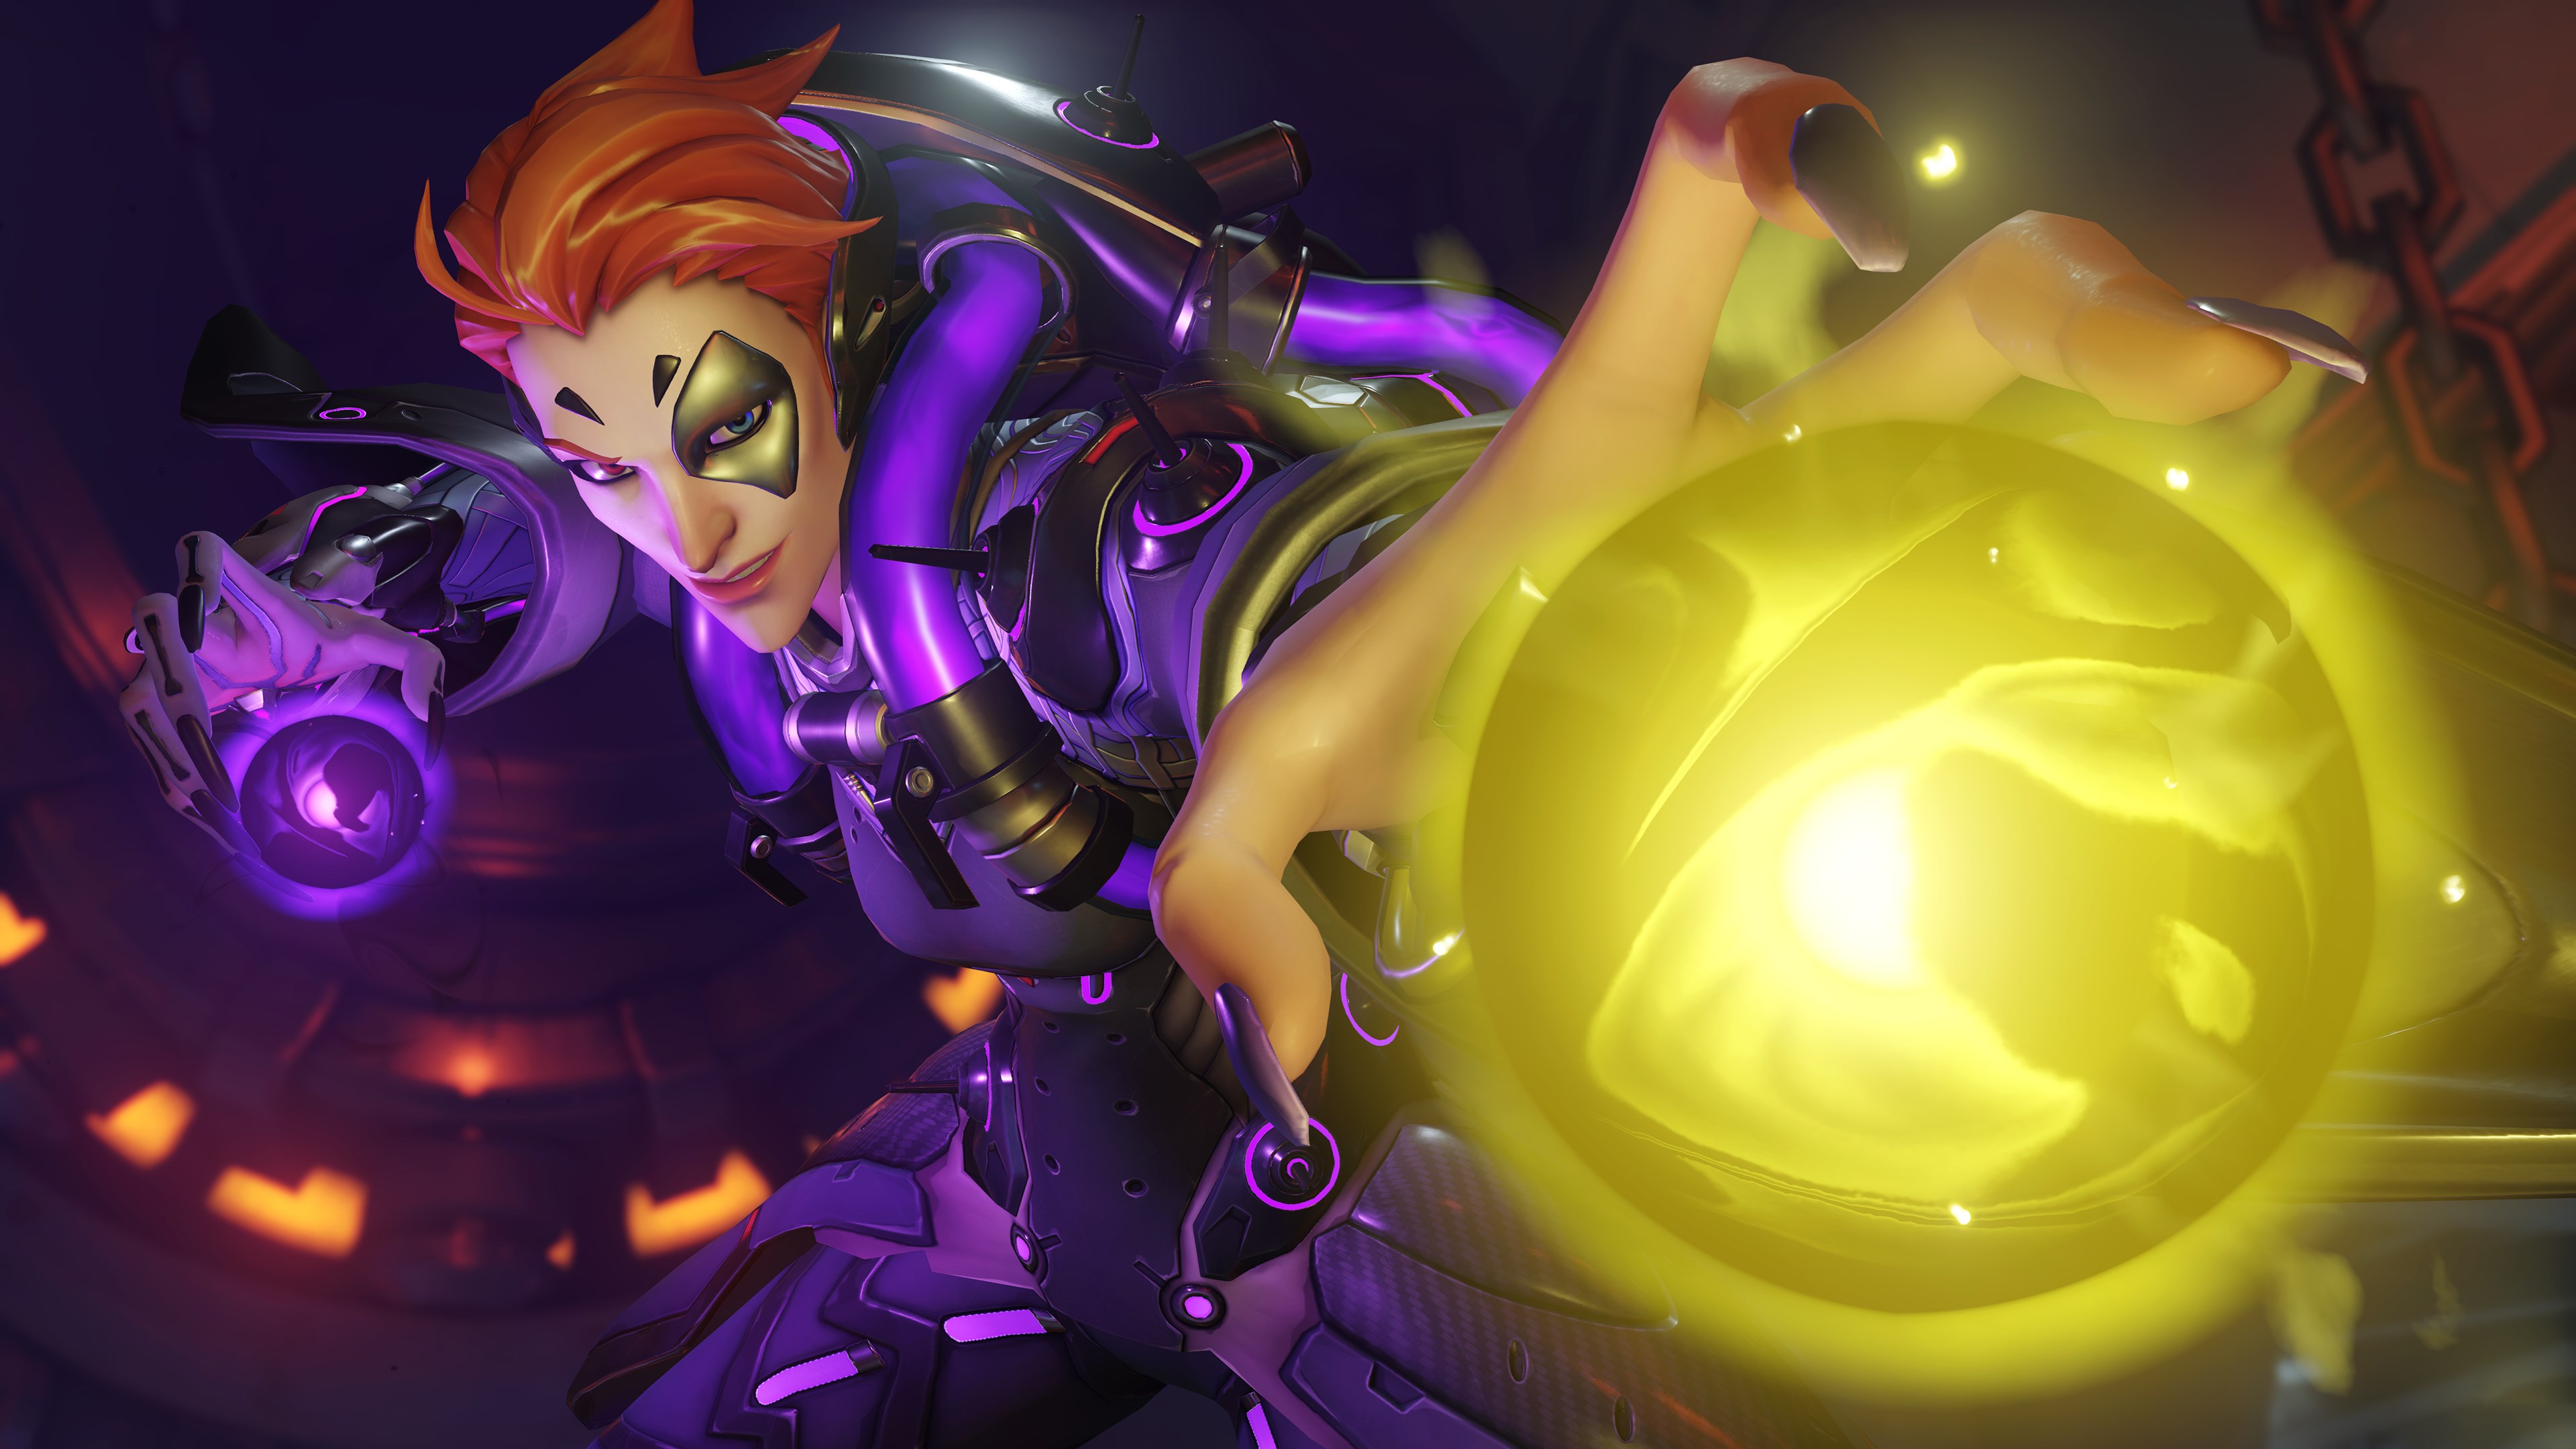 Episode 2 - Moira, Blizzard World, and the World Cup